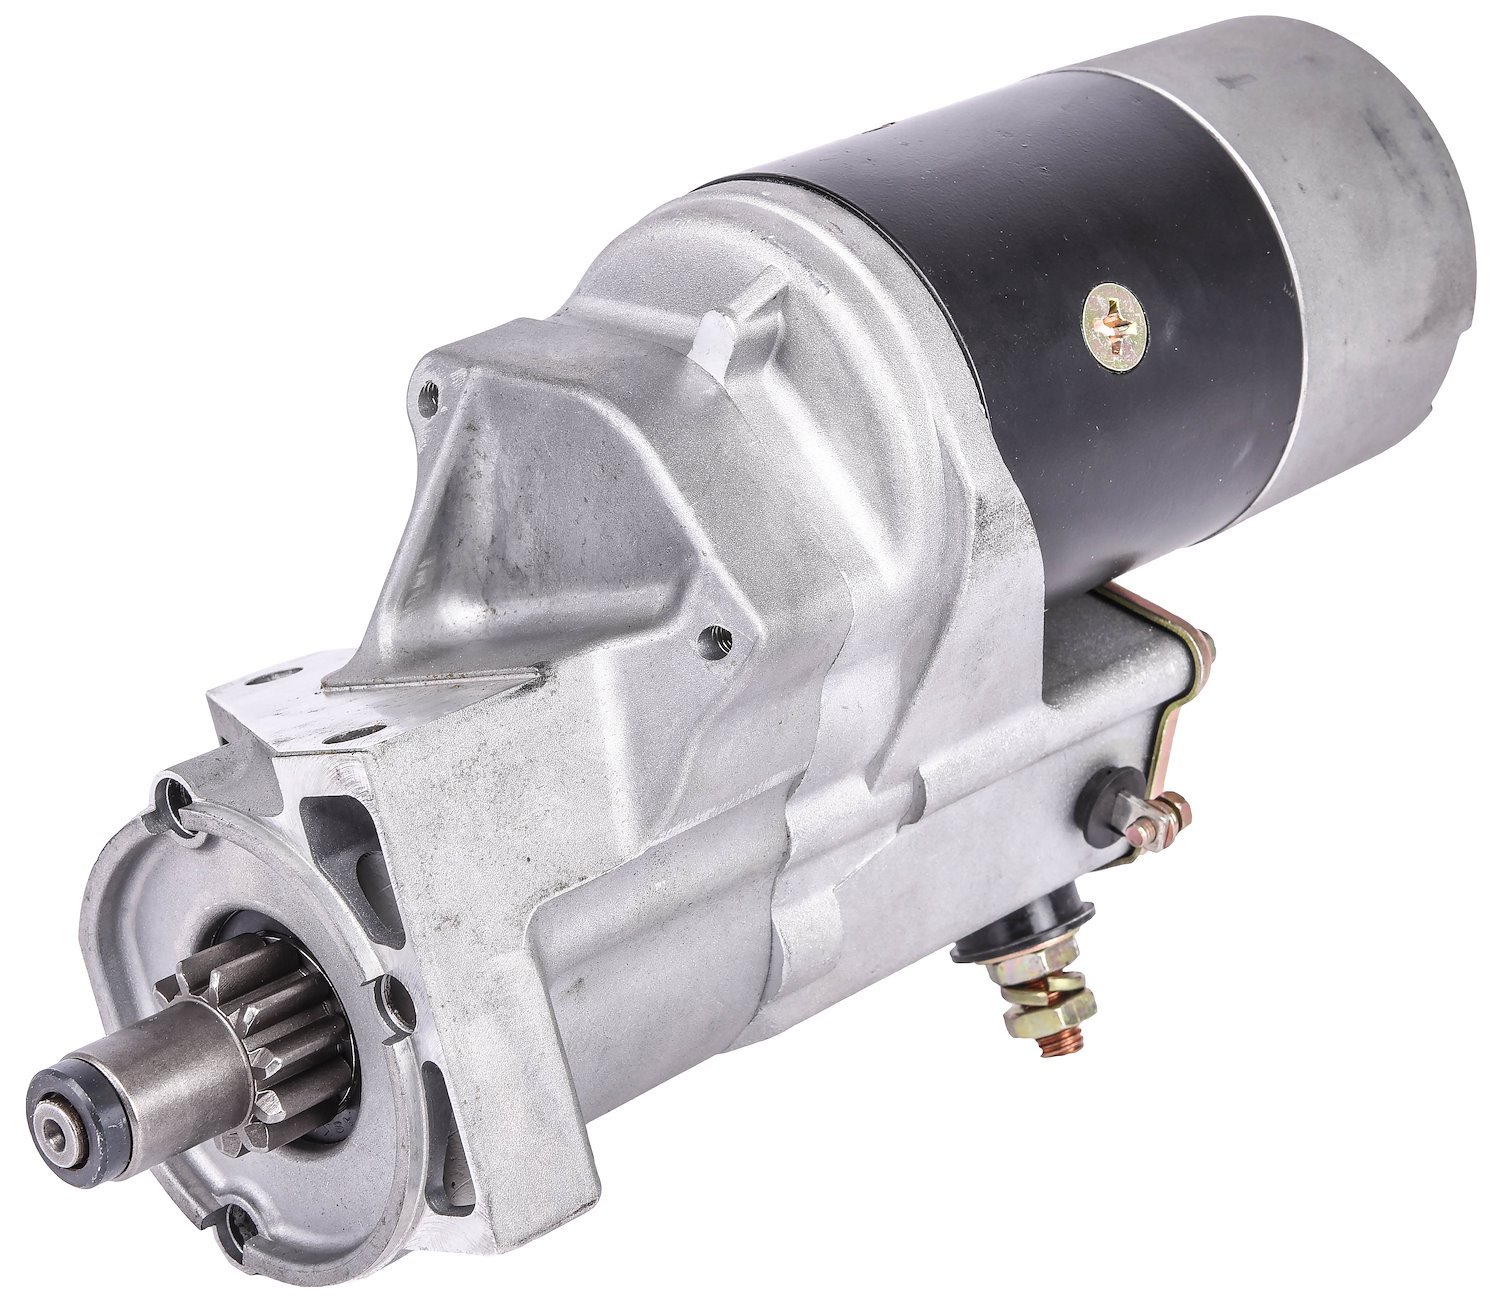 High-Performance Diesel Starter for 1982-2002 Chevy, GMC 1500, 2500, 3500 6.2L, 6.5L